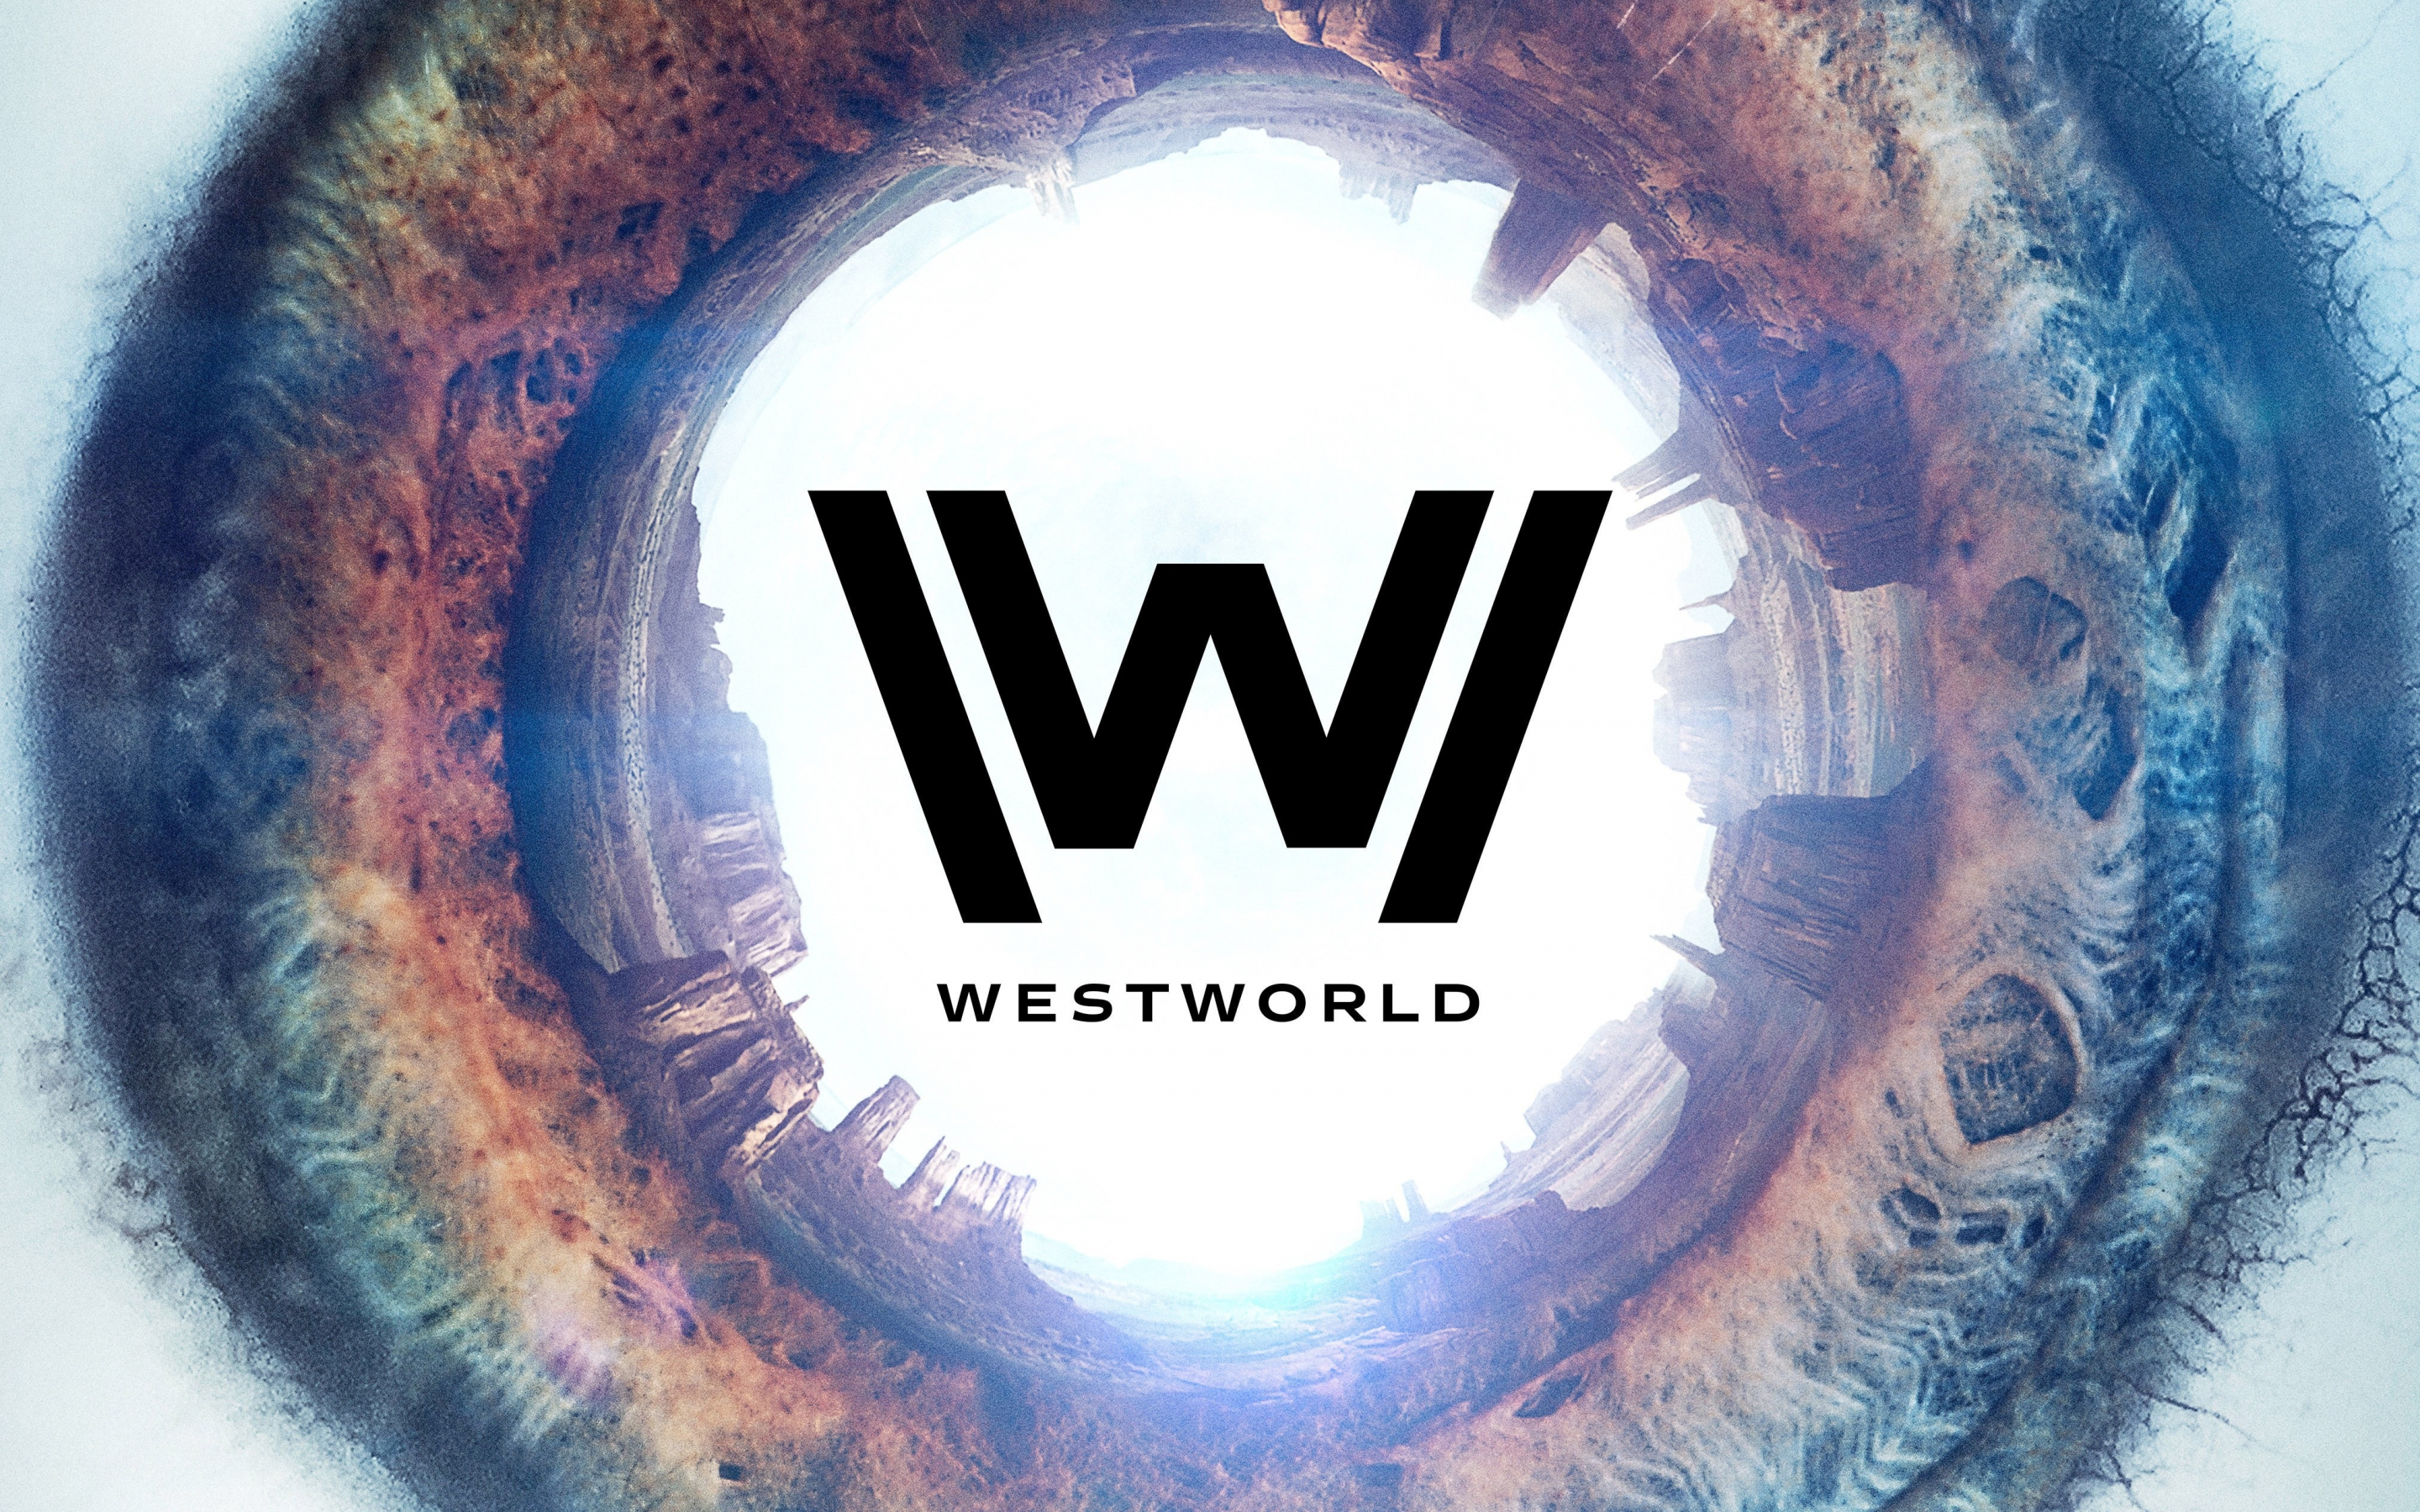 Westworld, mystery, sci-fi, tv show, poster, 2018, 2880x1800 wallpaper